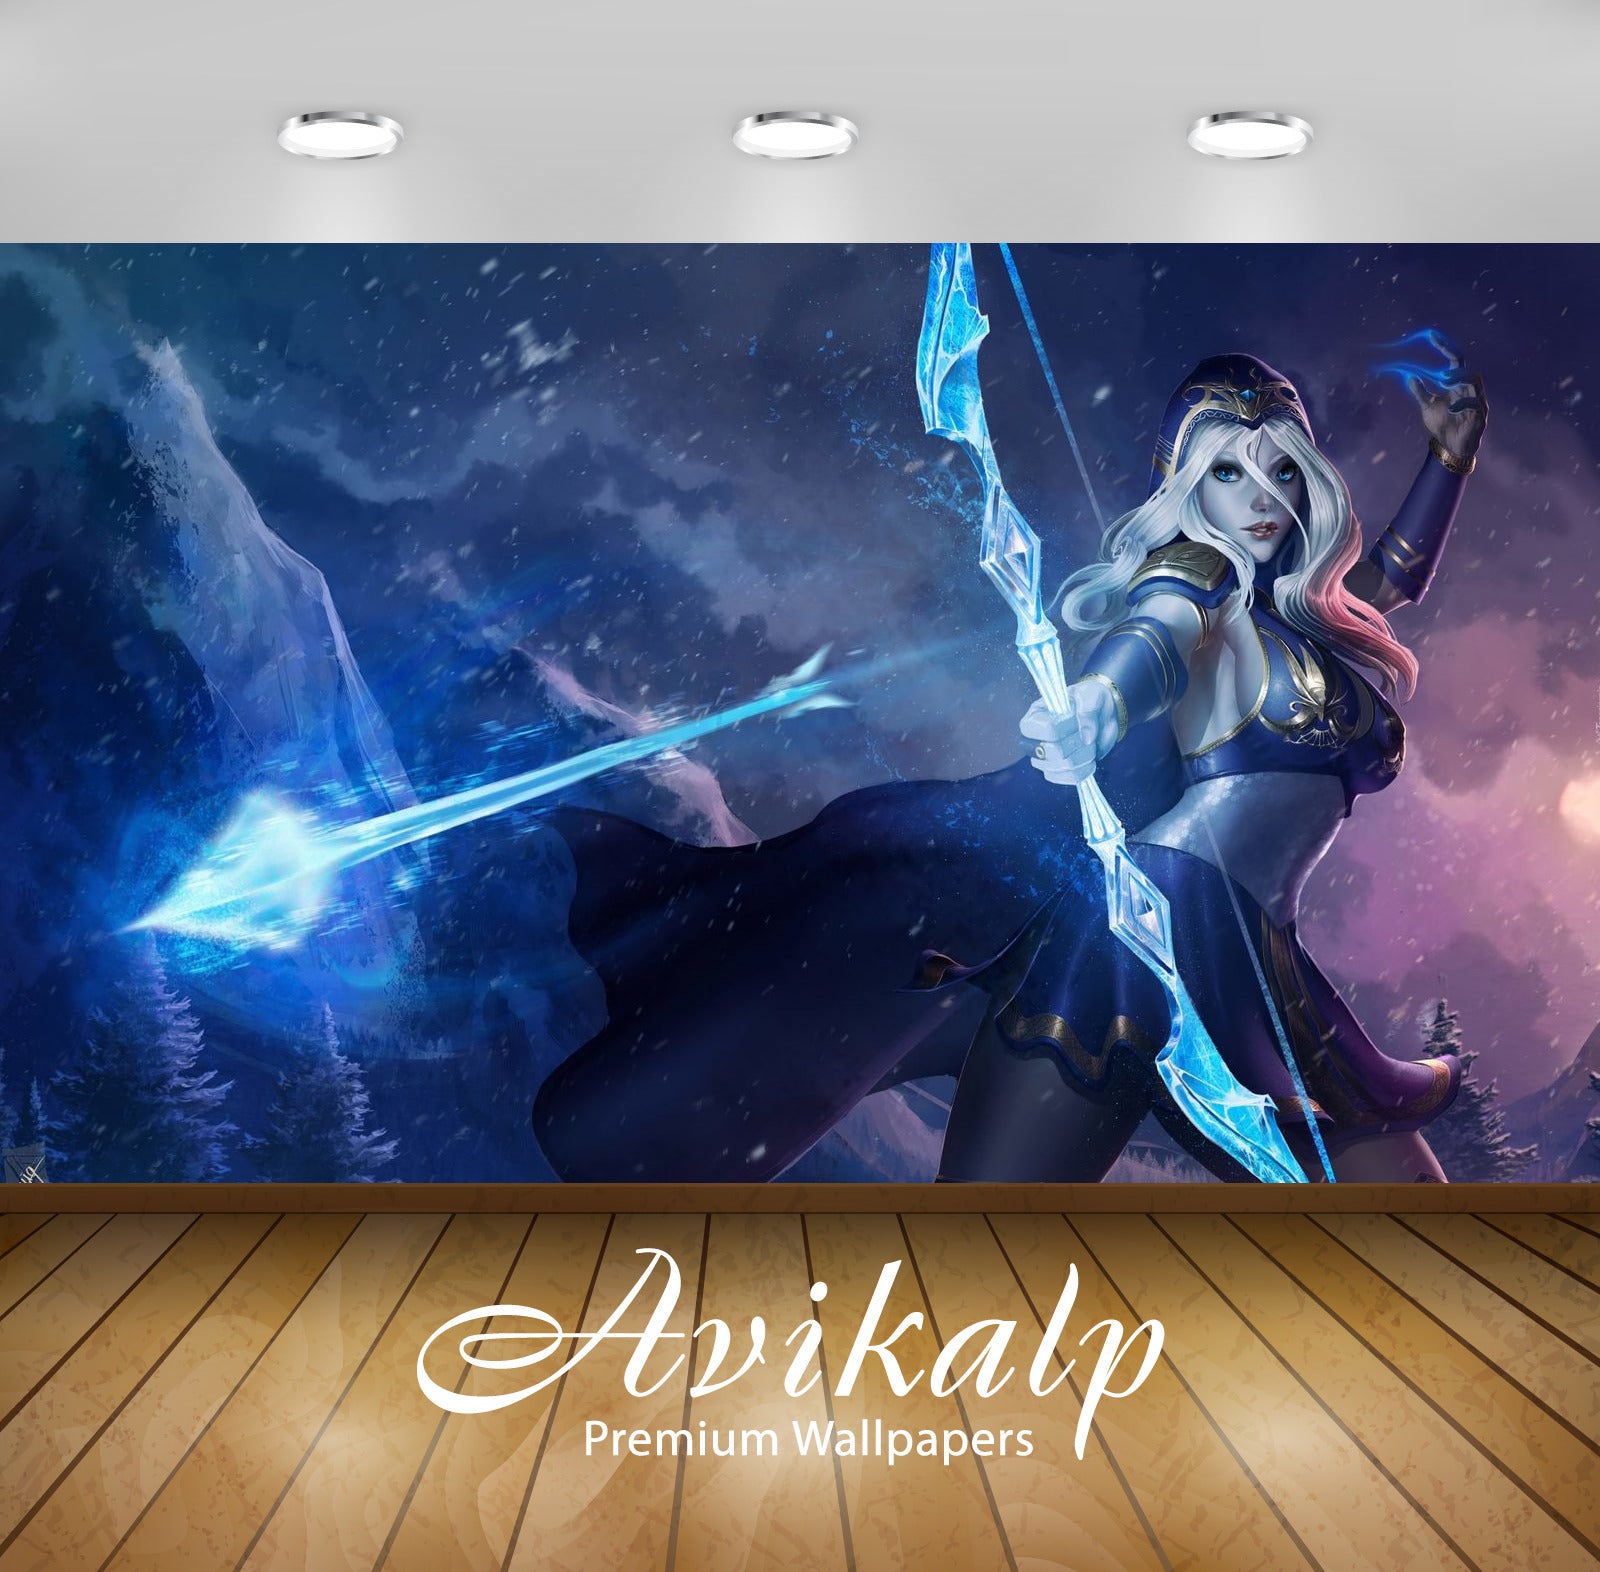 Avikalp Exclusive Awi2389 Ashe Fan Art Heroine League Of Legends Video Game Full HD Wallpapers for L